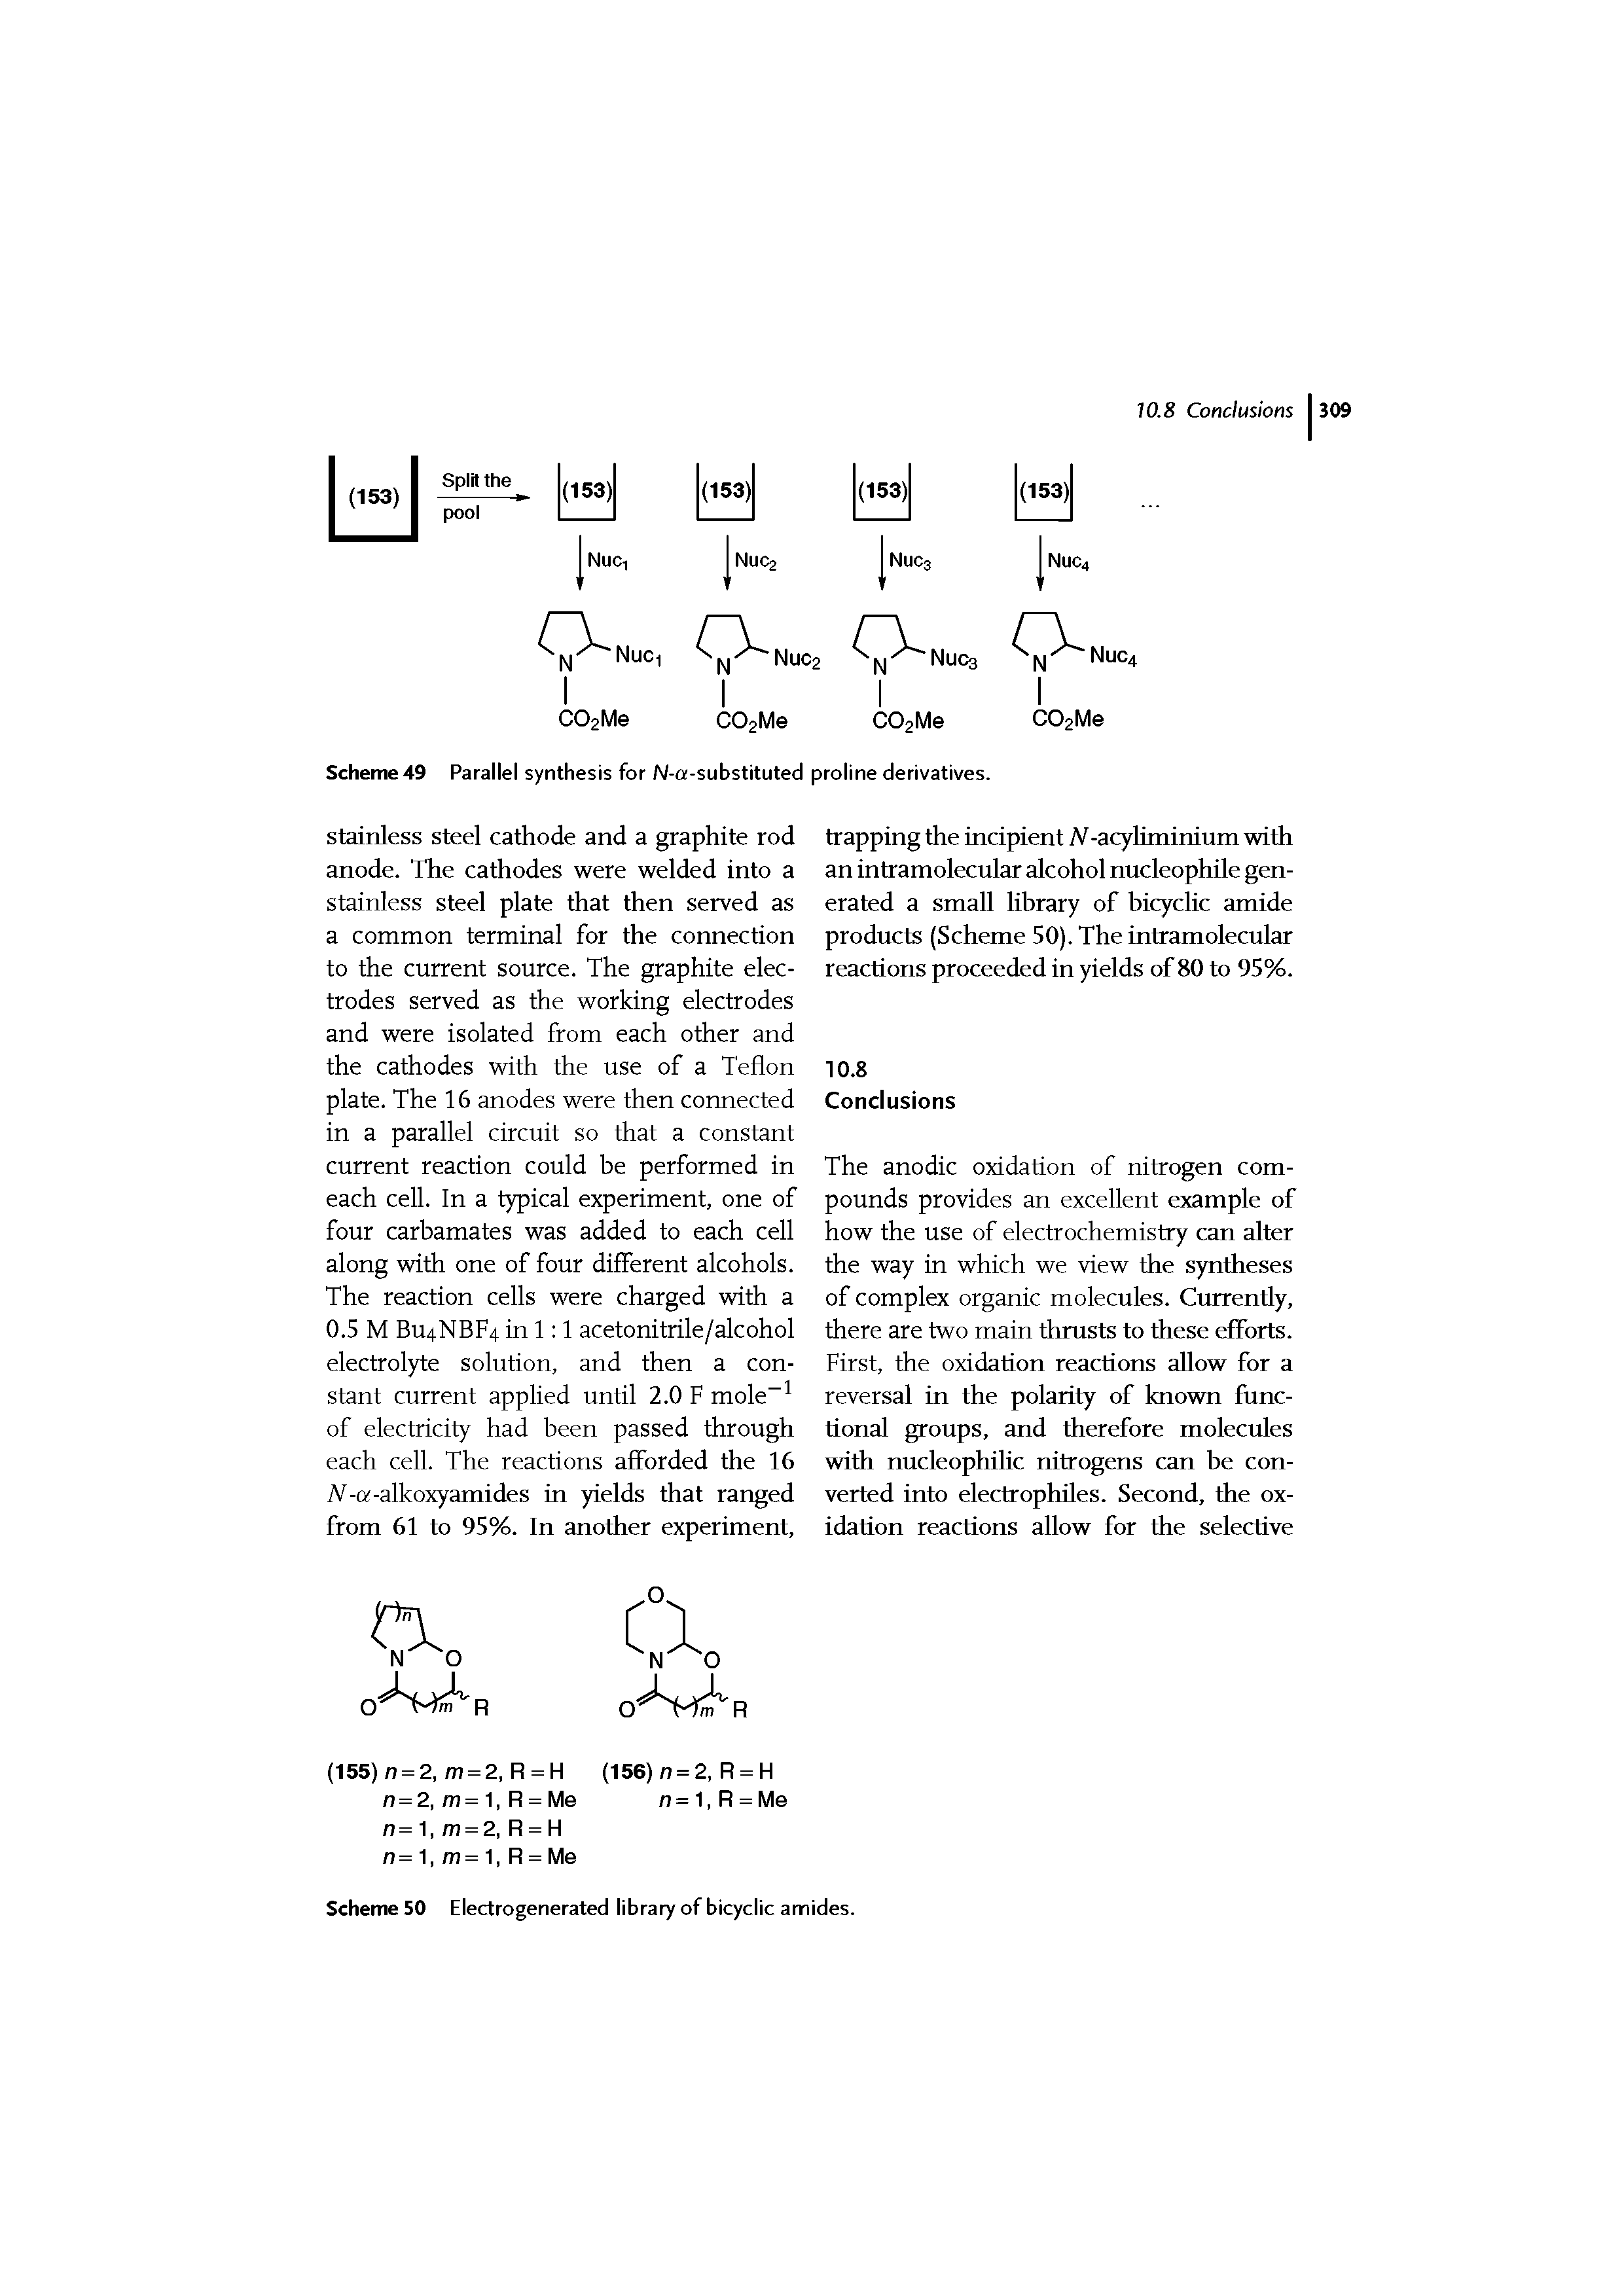 Scheme 49 Parallel synthesis for N-a-substituted proline derivatives.